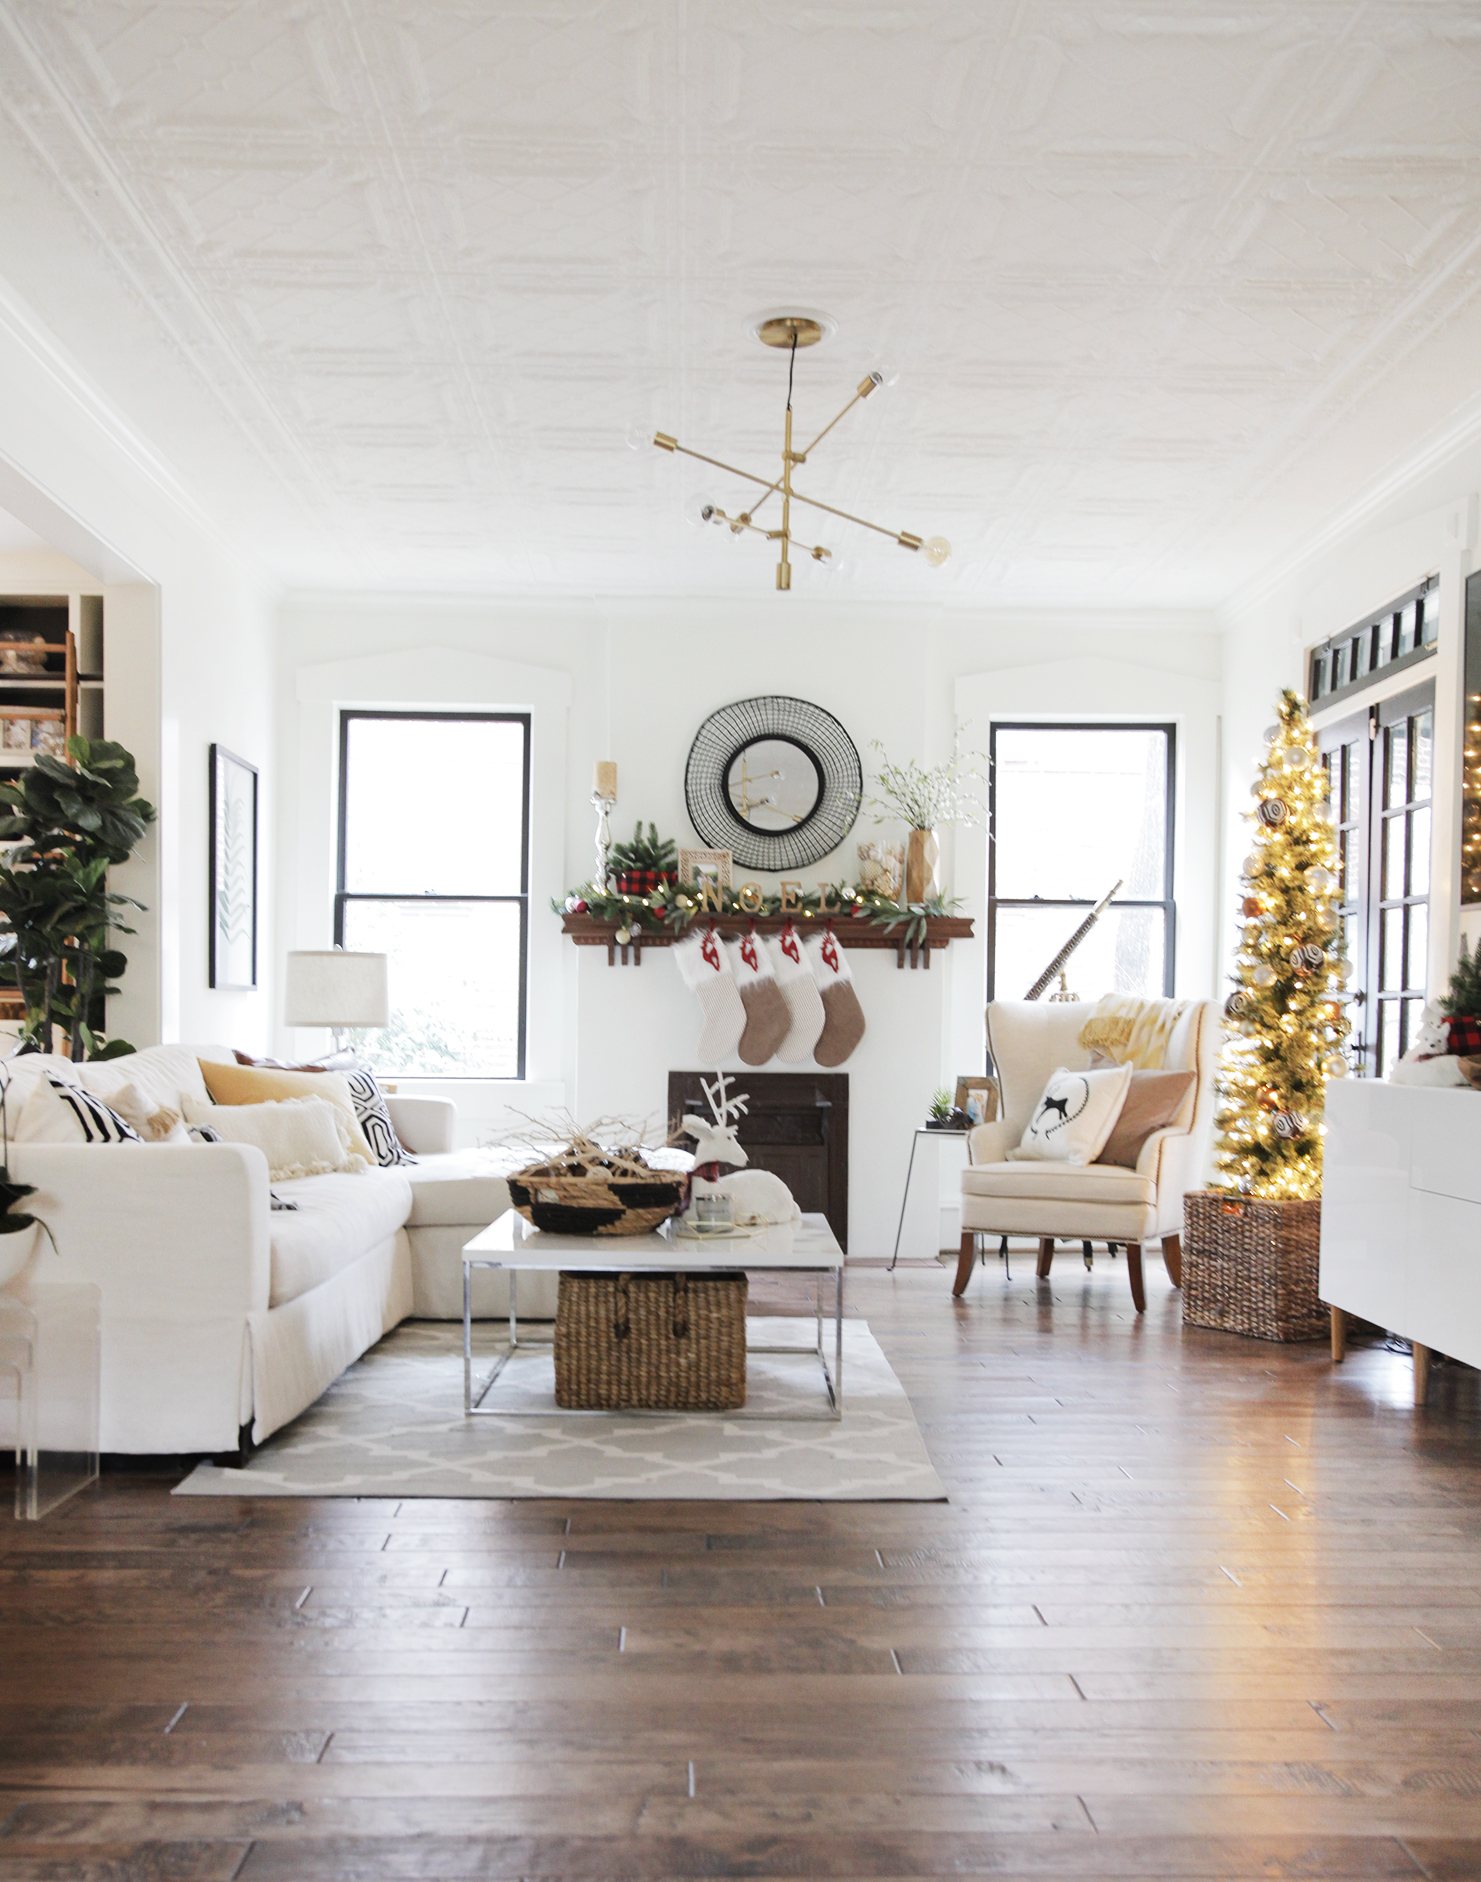 Create a Warm and Inviting Home for the Holidays